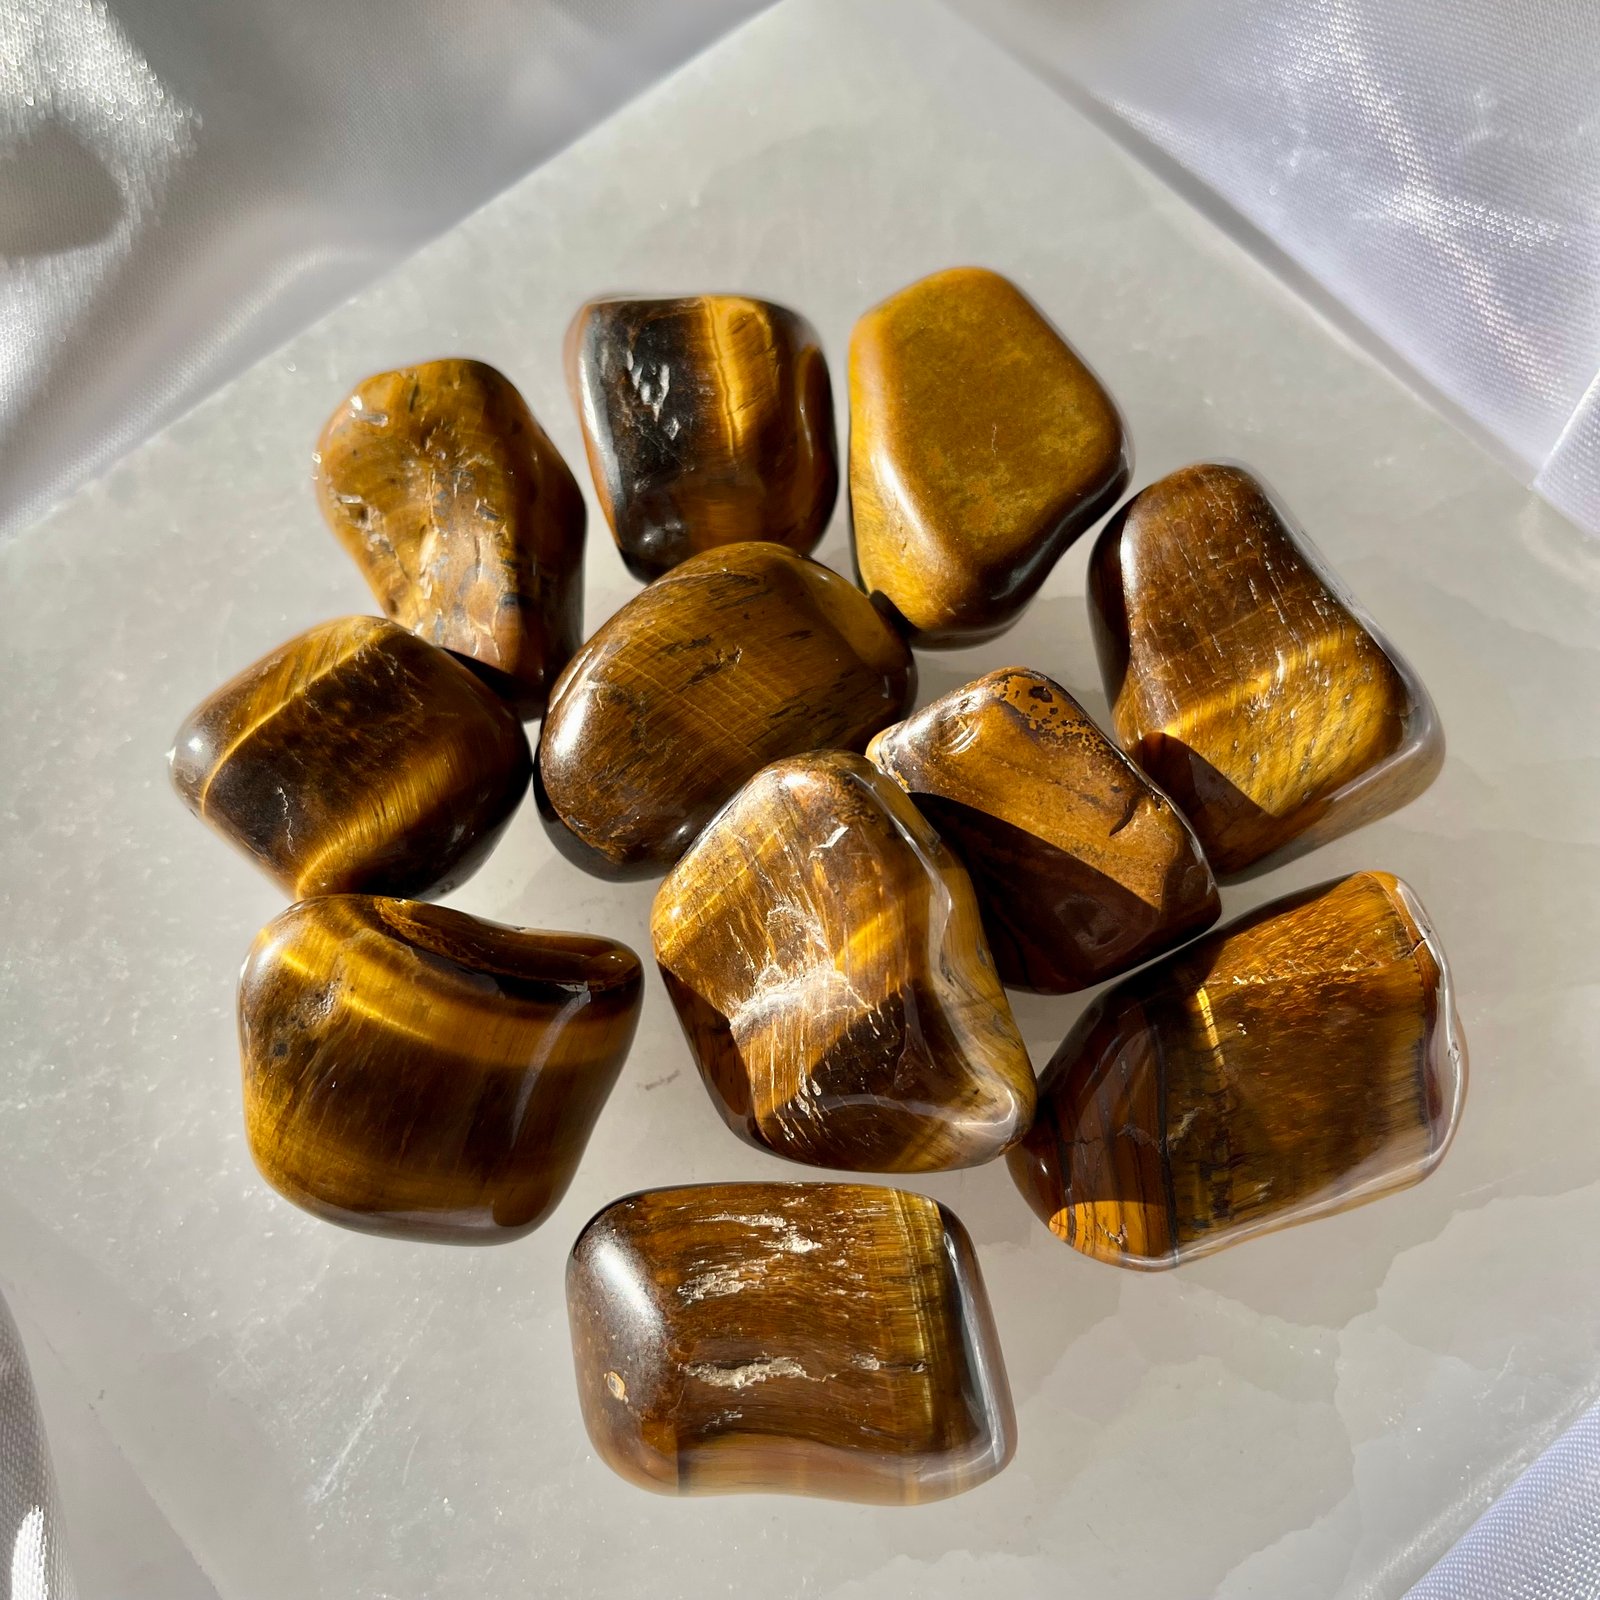 Tumbled pieces 5 Quartz variant Tiger Eye Tumbled and Polished Great Color and Chatoyancy Golden Tiger Eye Lot of Five